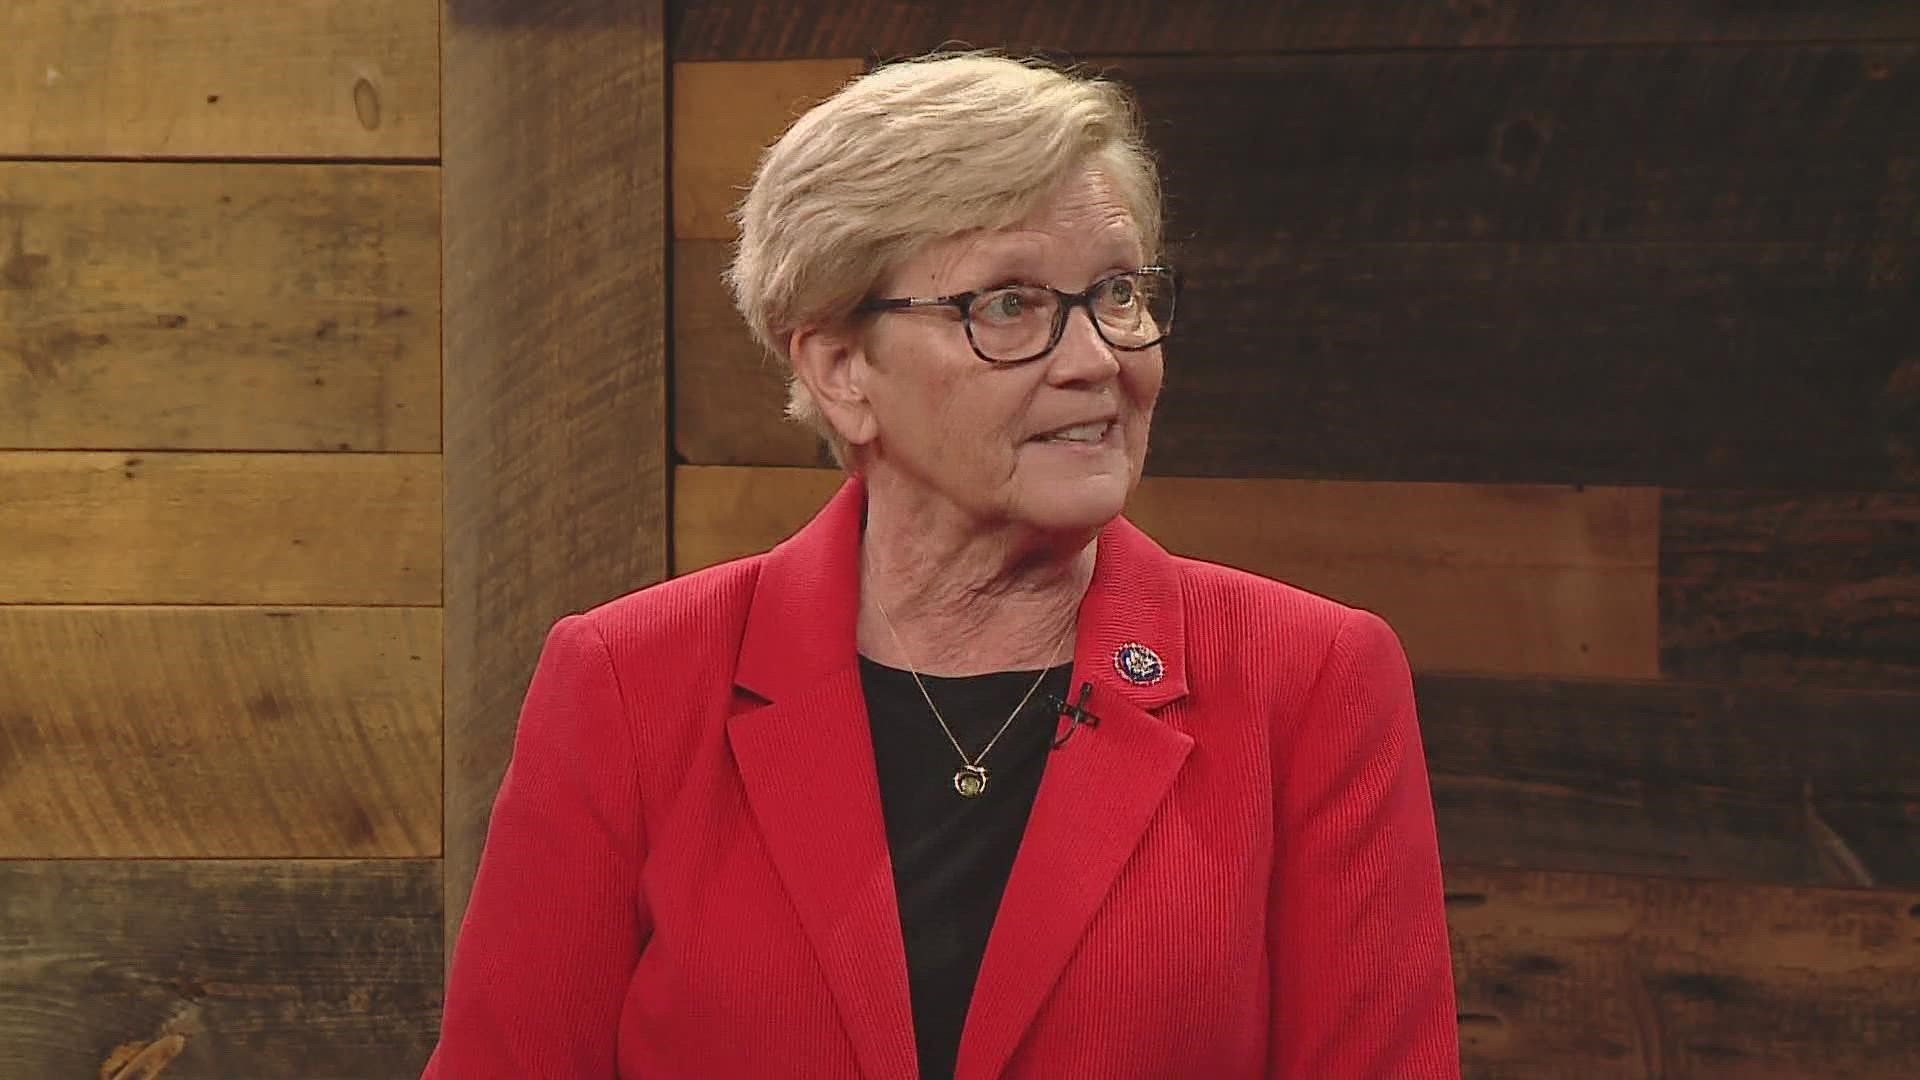 In the race, Chellie Pingree is seeking re-election in Maine's first congressional district.